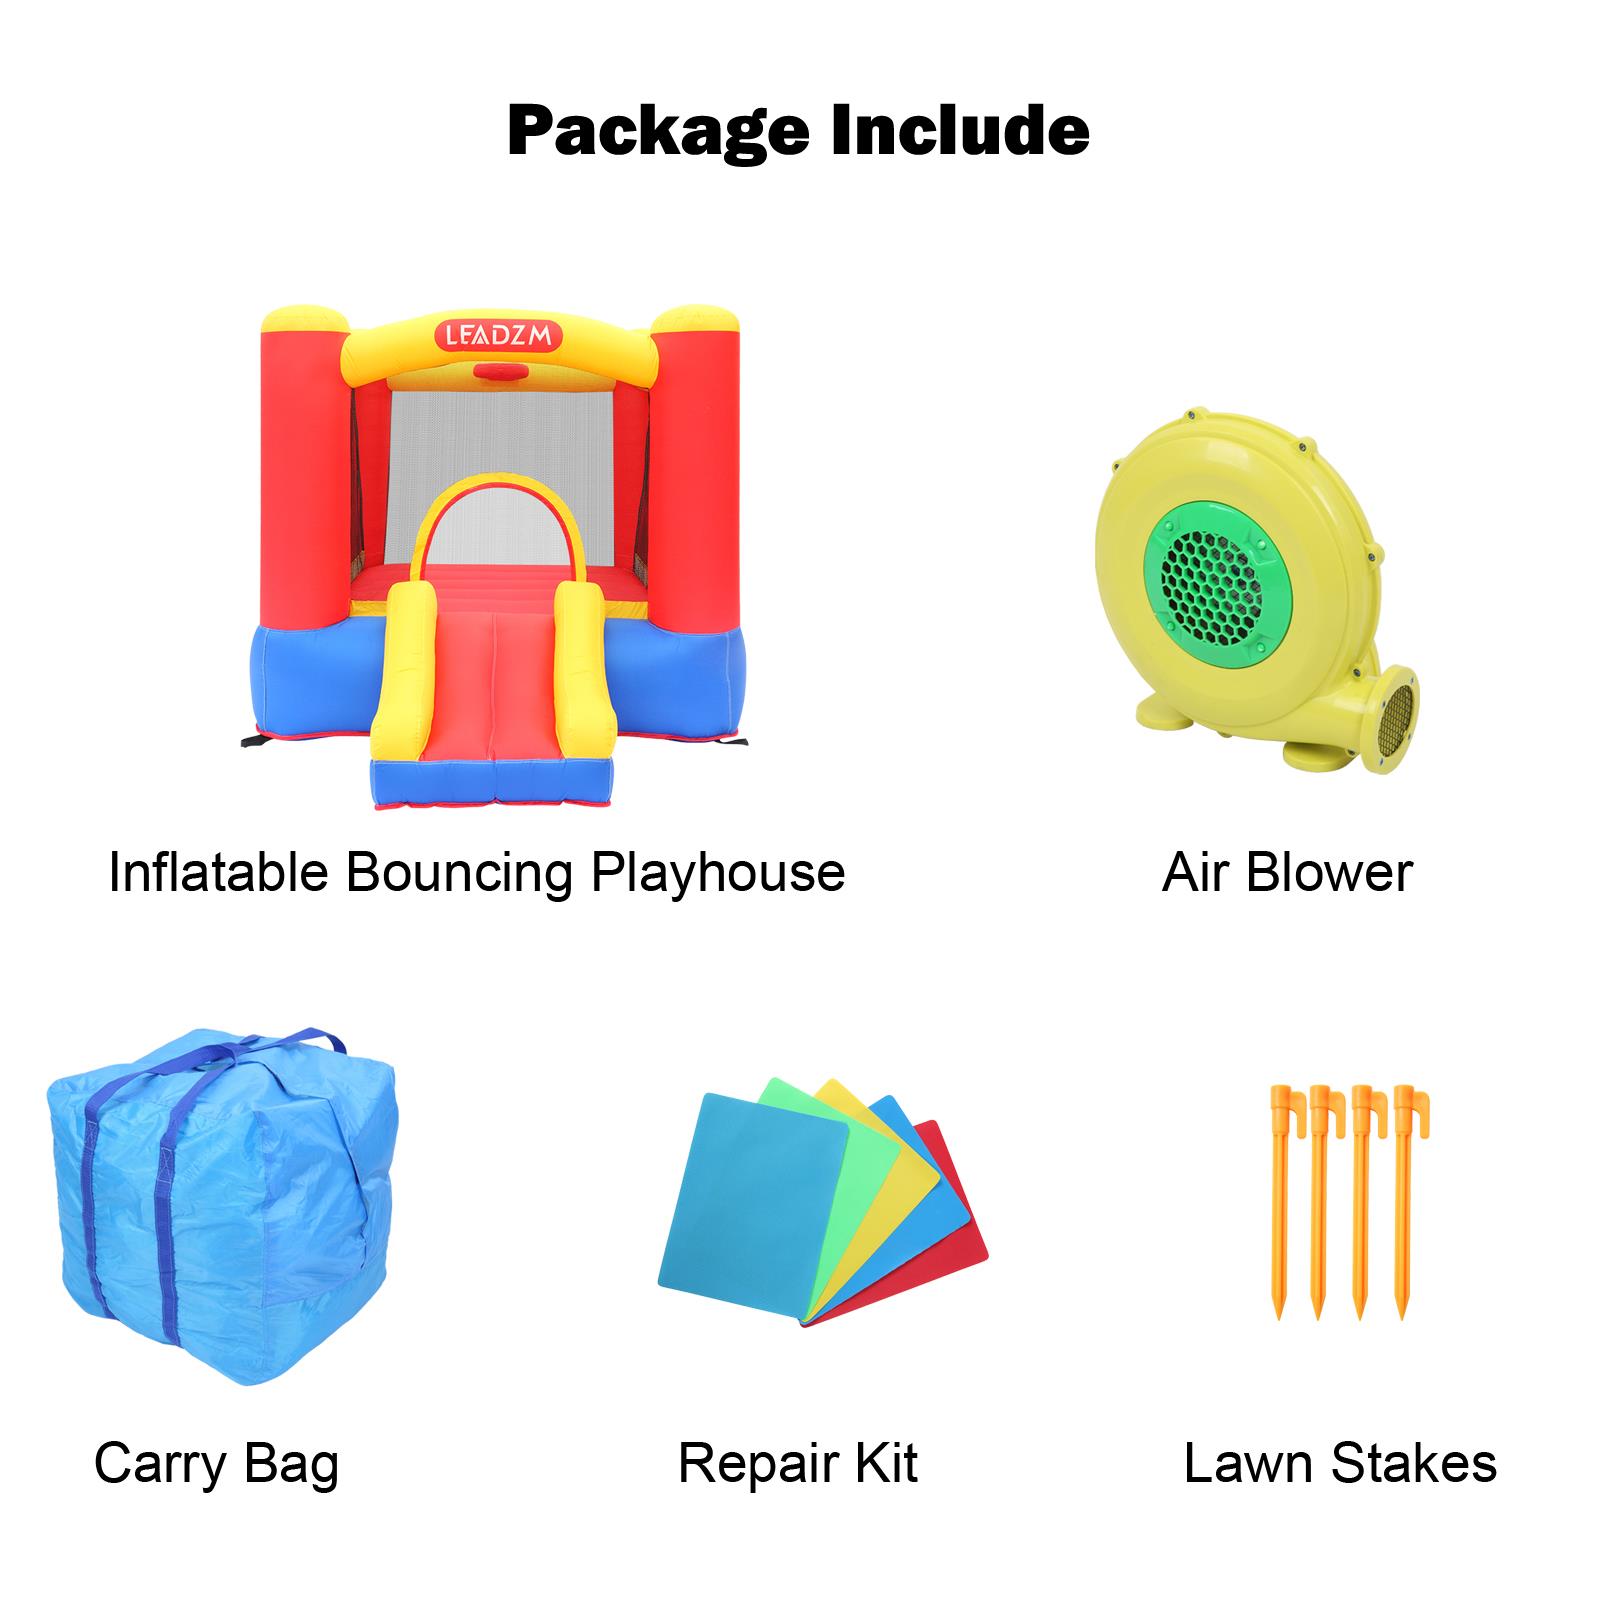 Ktaxon Toddler Inflatable Bounce House, Jumper Slide Castle with 350W Air Blower - image 5 of 7